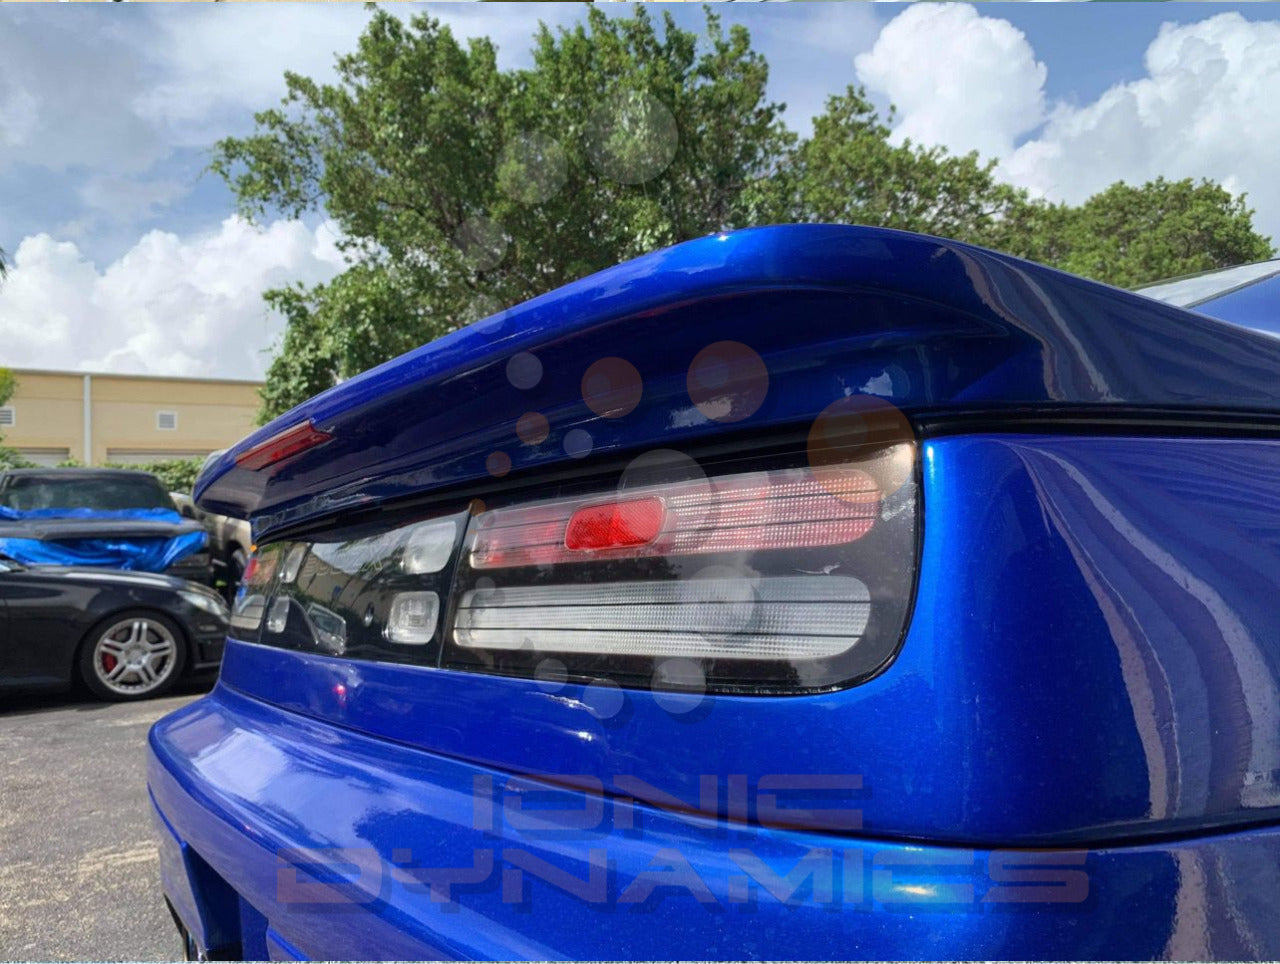 TAX REFUND SALE. 300zx M-spec rear spoiler Save $40 and $80